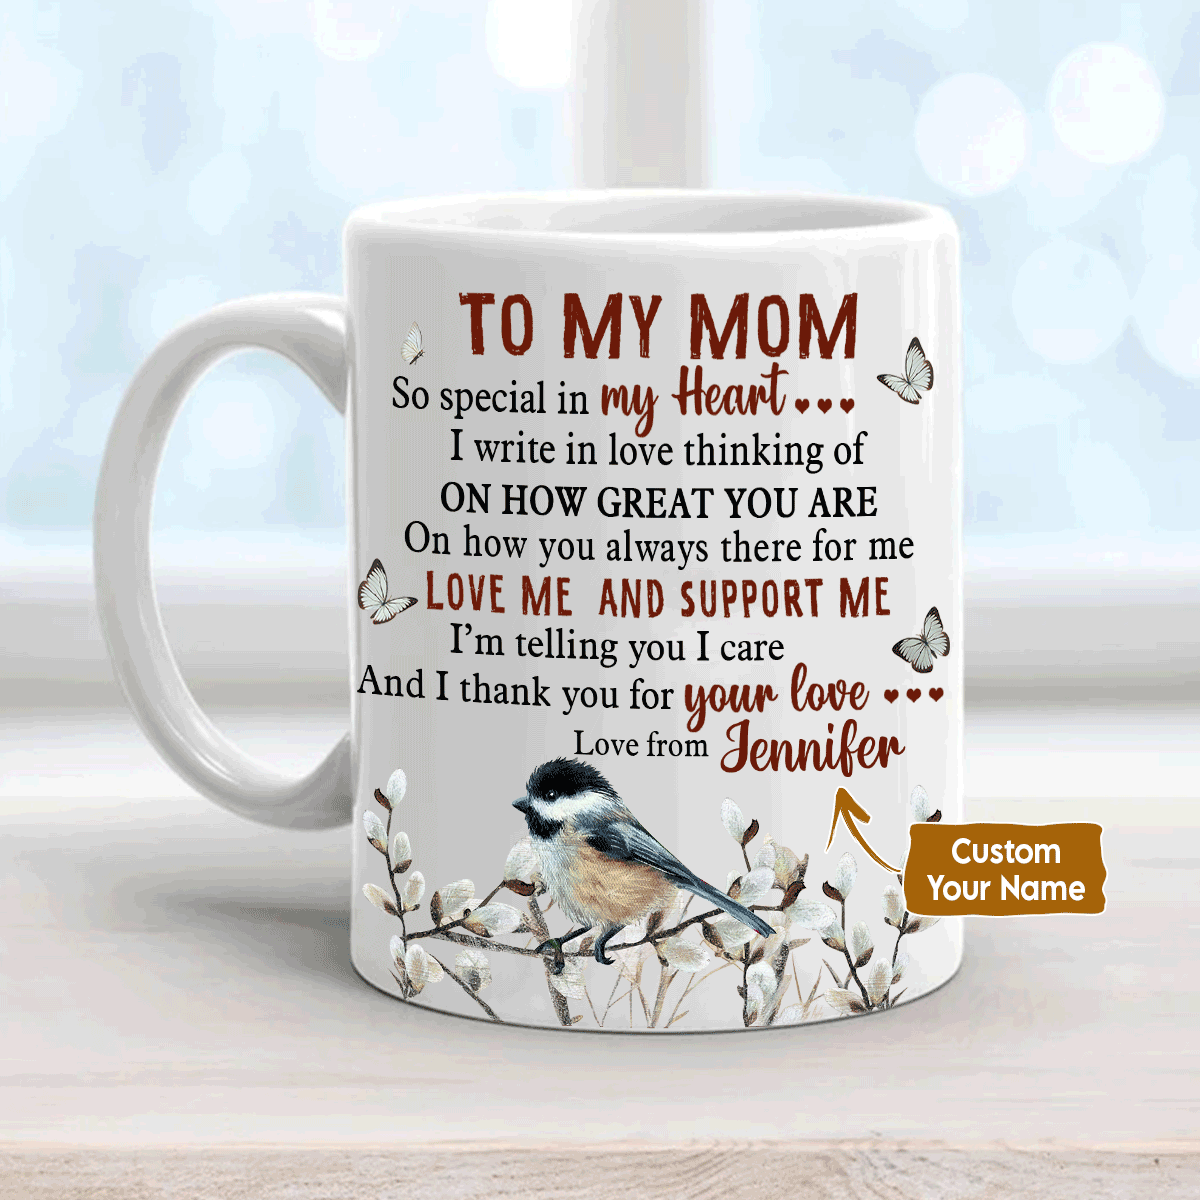 Gift For Mom Personalized Mug - Daughter to mom, Beautiful sparrow, Cotton flower Mug - Custom Gift For Mother's Day, Presents for Mom - Your Love Mug